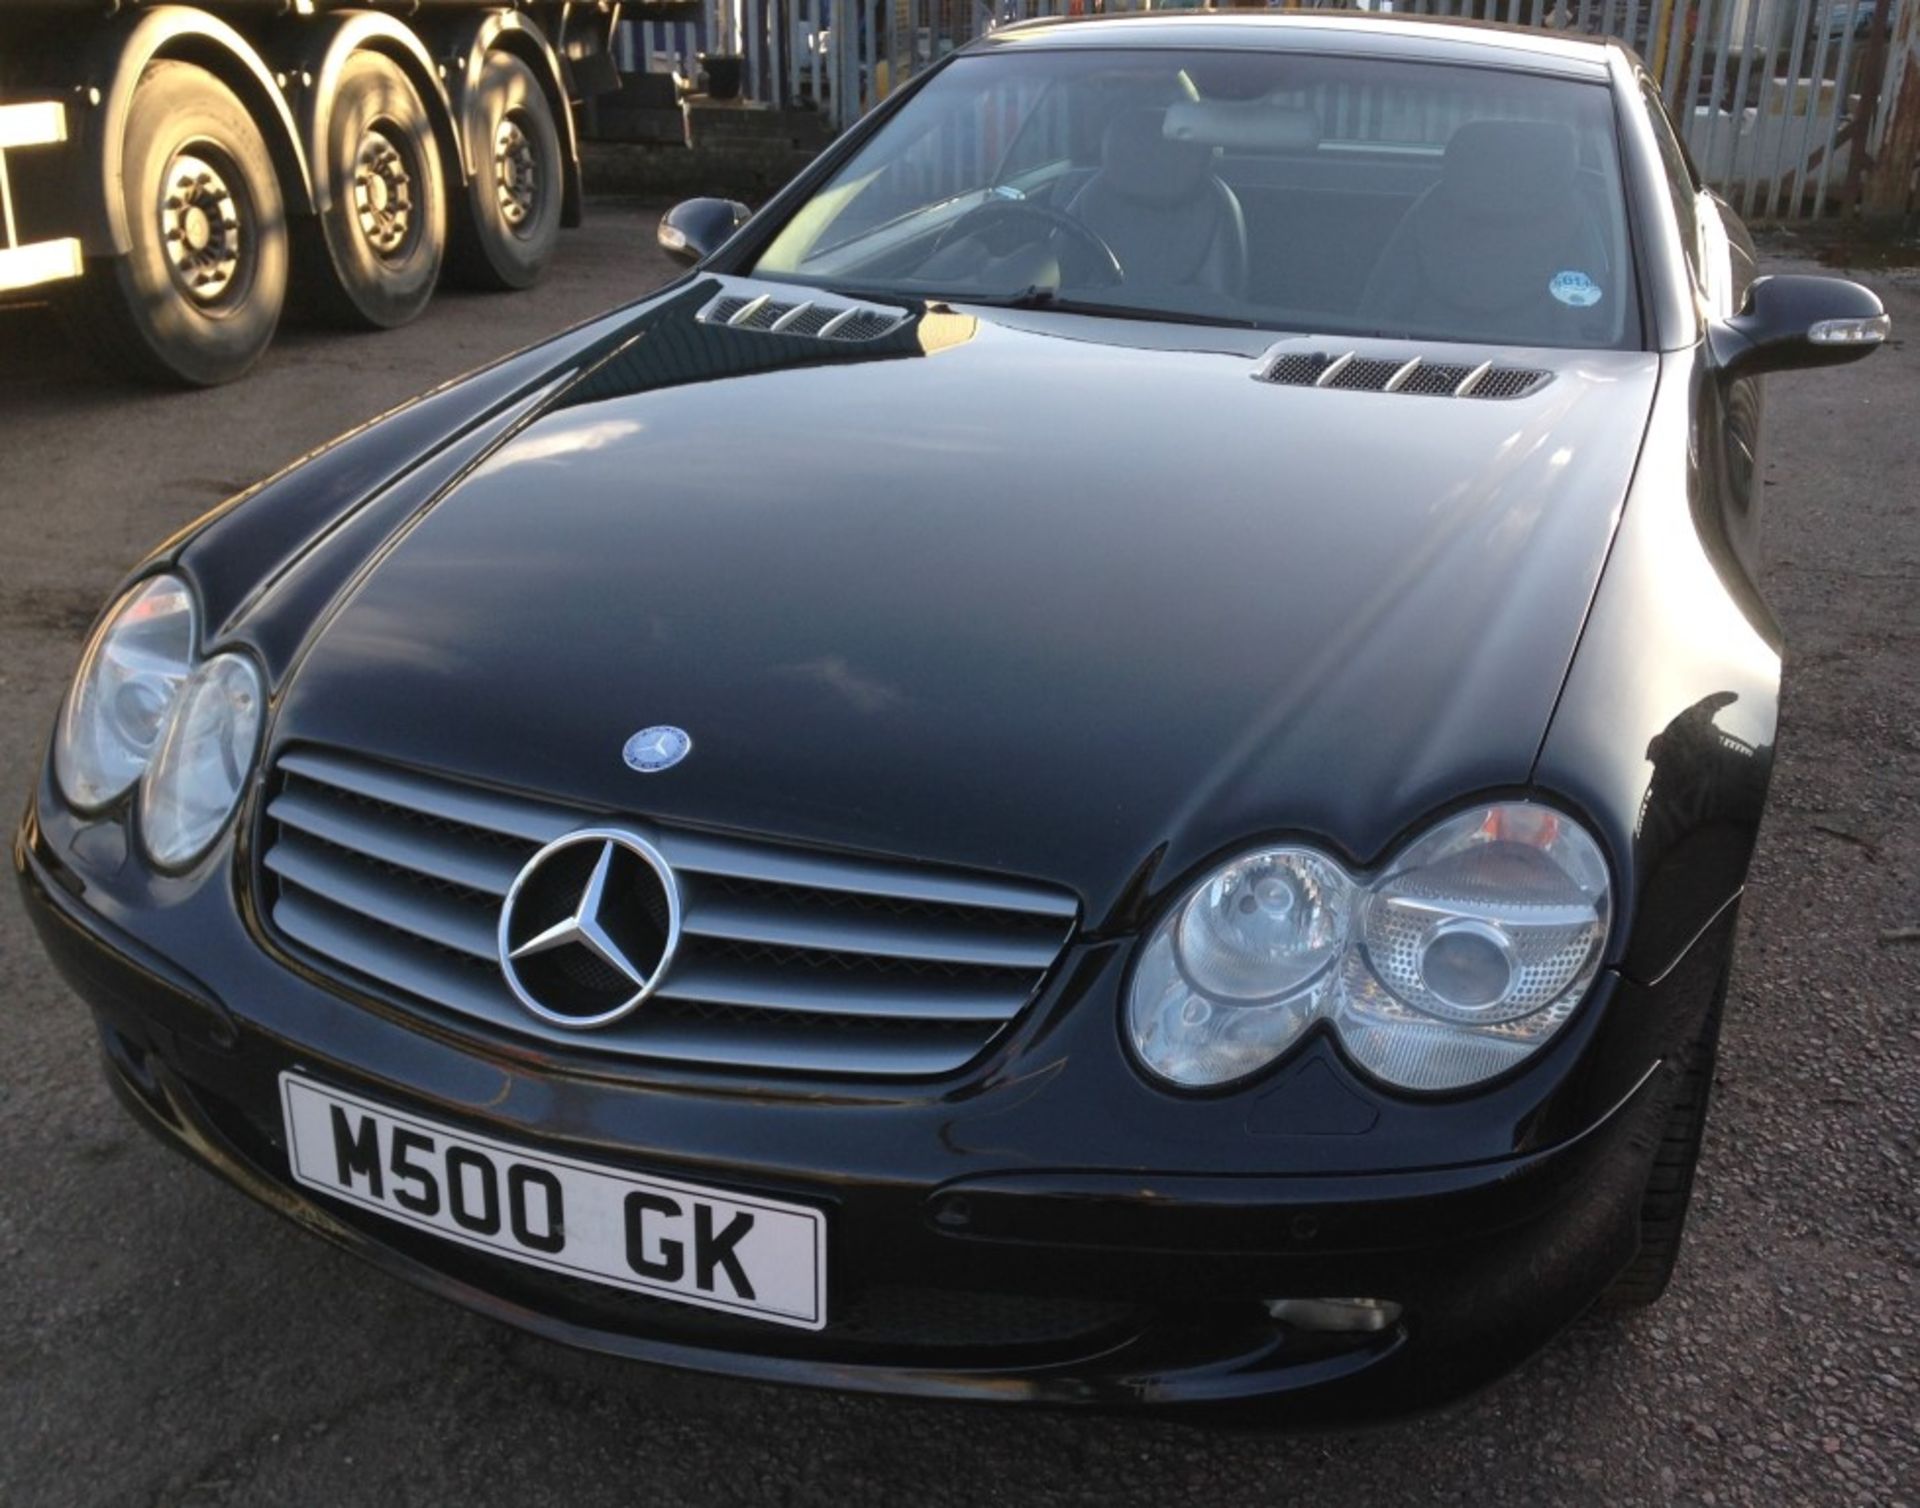 1 x Mercedes SL500 Automatic 5.0 Convertible - Petrol - Year 2002 - 94,500 Miles - Long MOT Expiry - Image 12 of 31